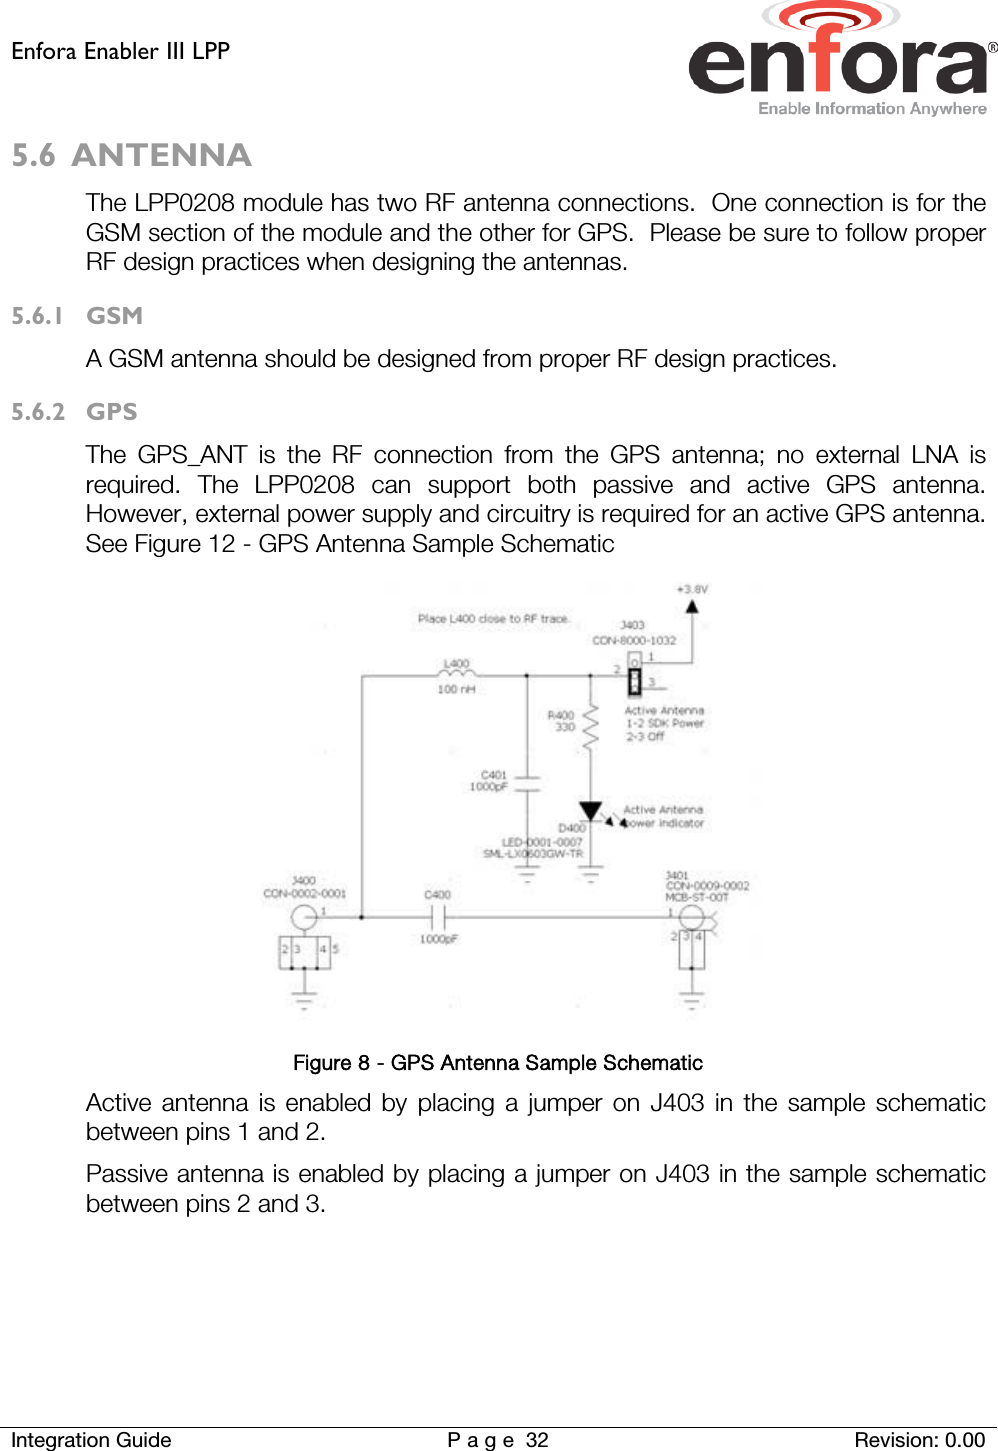 Enfora Enabler III LPP    Integration Guide Page 32 Revision: 0.00  5.6 ANTENNA The LPP0208 module has two RF antenna connections.  One connection is for the GSM section of the module and the other for GPS.  Please be sure to follow proper RF design practices when designing the antennas. 5.6.1 GSM A GSM antenna should be designed from proper RF design practices. 5.6.2 GPS The GPS_ANT is the RF connection from the GPS antenna; no external LNA is required. The LPP0208 can support both passive and active GPS antenna. However, external power supply and circuitry is required for an active GPS antenna. See Figure 12 - GPS Antenna Sample Schematic  Figure 8 - GPS Antenna Sample Schematic  Active antenna is enabled by placing a jumper on J403 in the sample schematic between pins 1 and 2. Passive antenna is enabled by placing a jumper on J403 in the sample schematic between pins 2 and 3.     